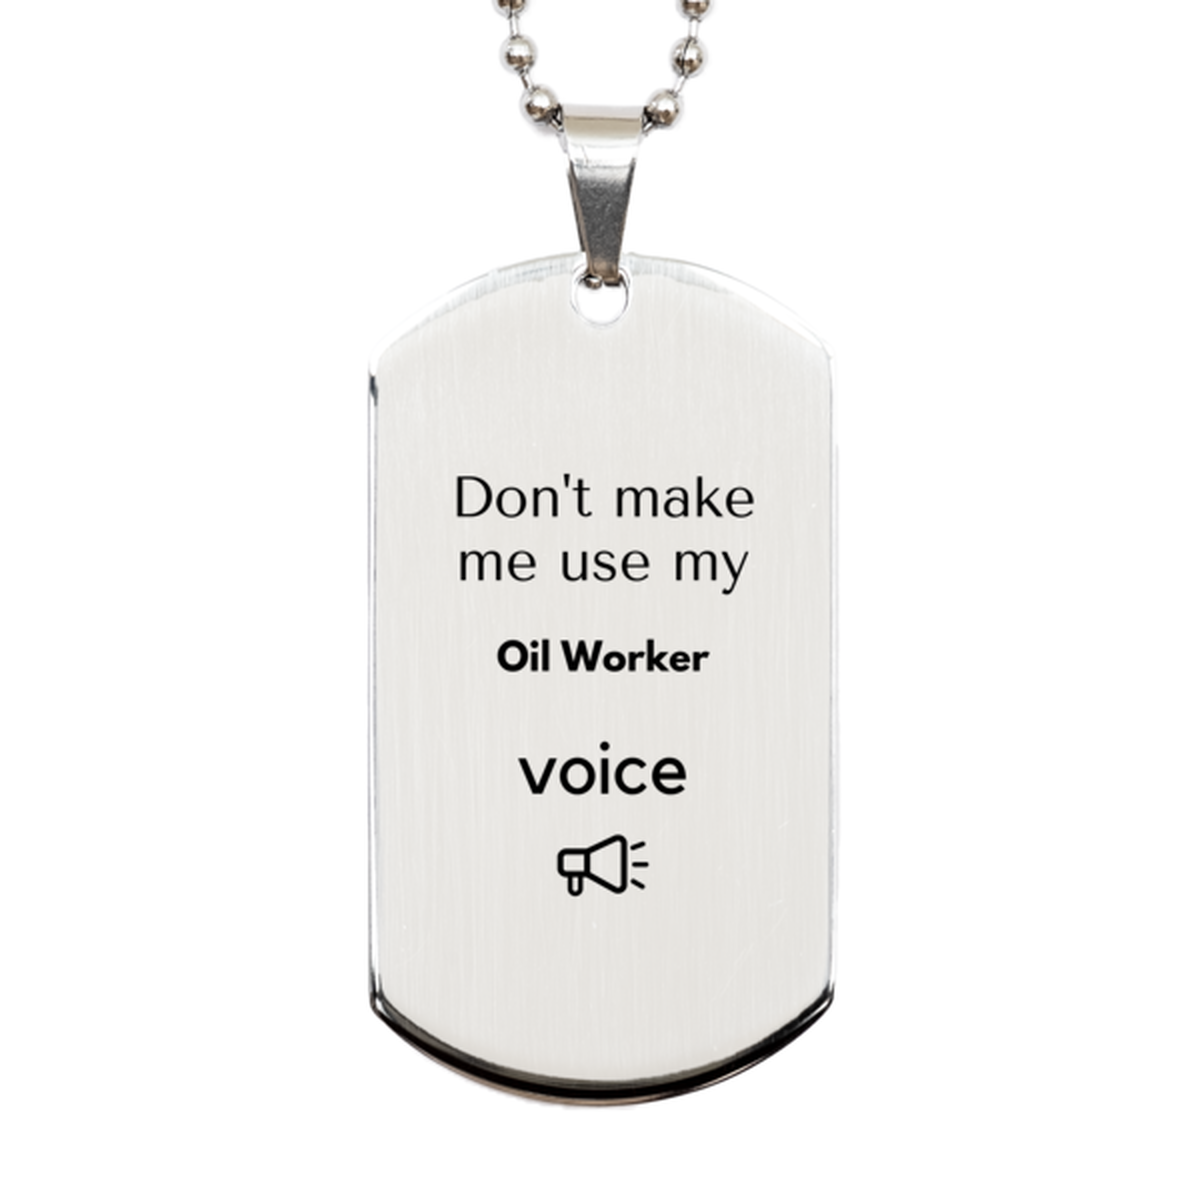 Don't make me use my Oil Worker voice, Sarcasm Oil Worker Gifts, Christmas Oil Worker Silver Dog Tag Birthday Unique Gifts For Oil Worker Coworkers, Men, Women, Colleague, Friends